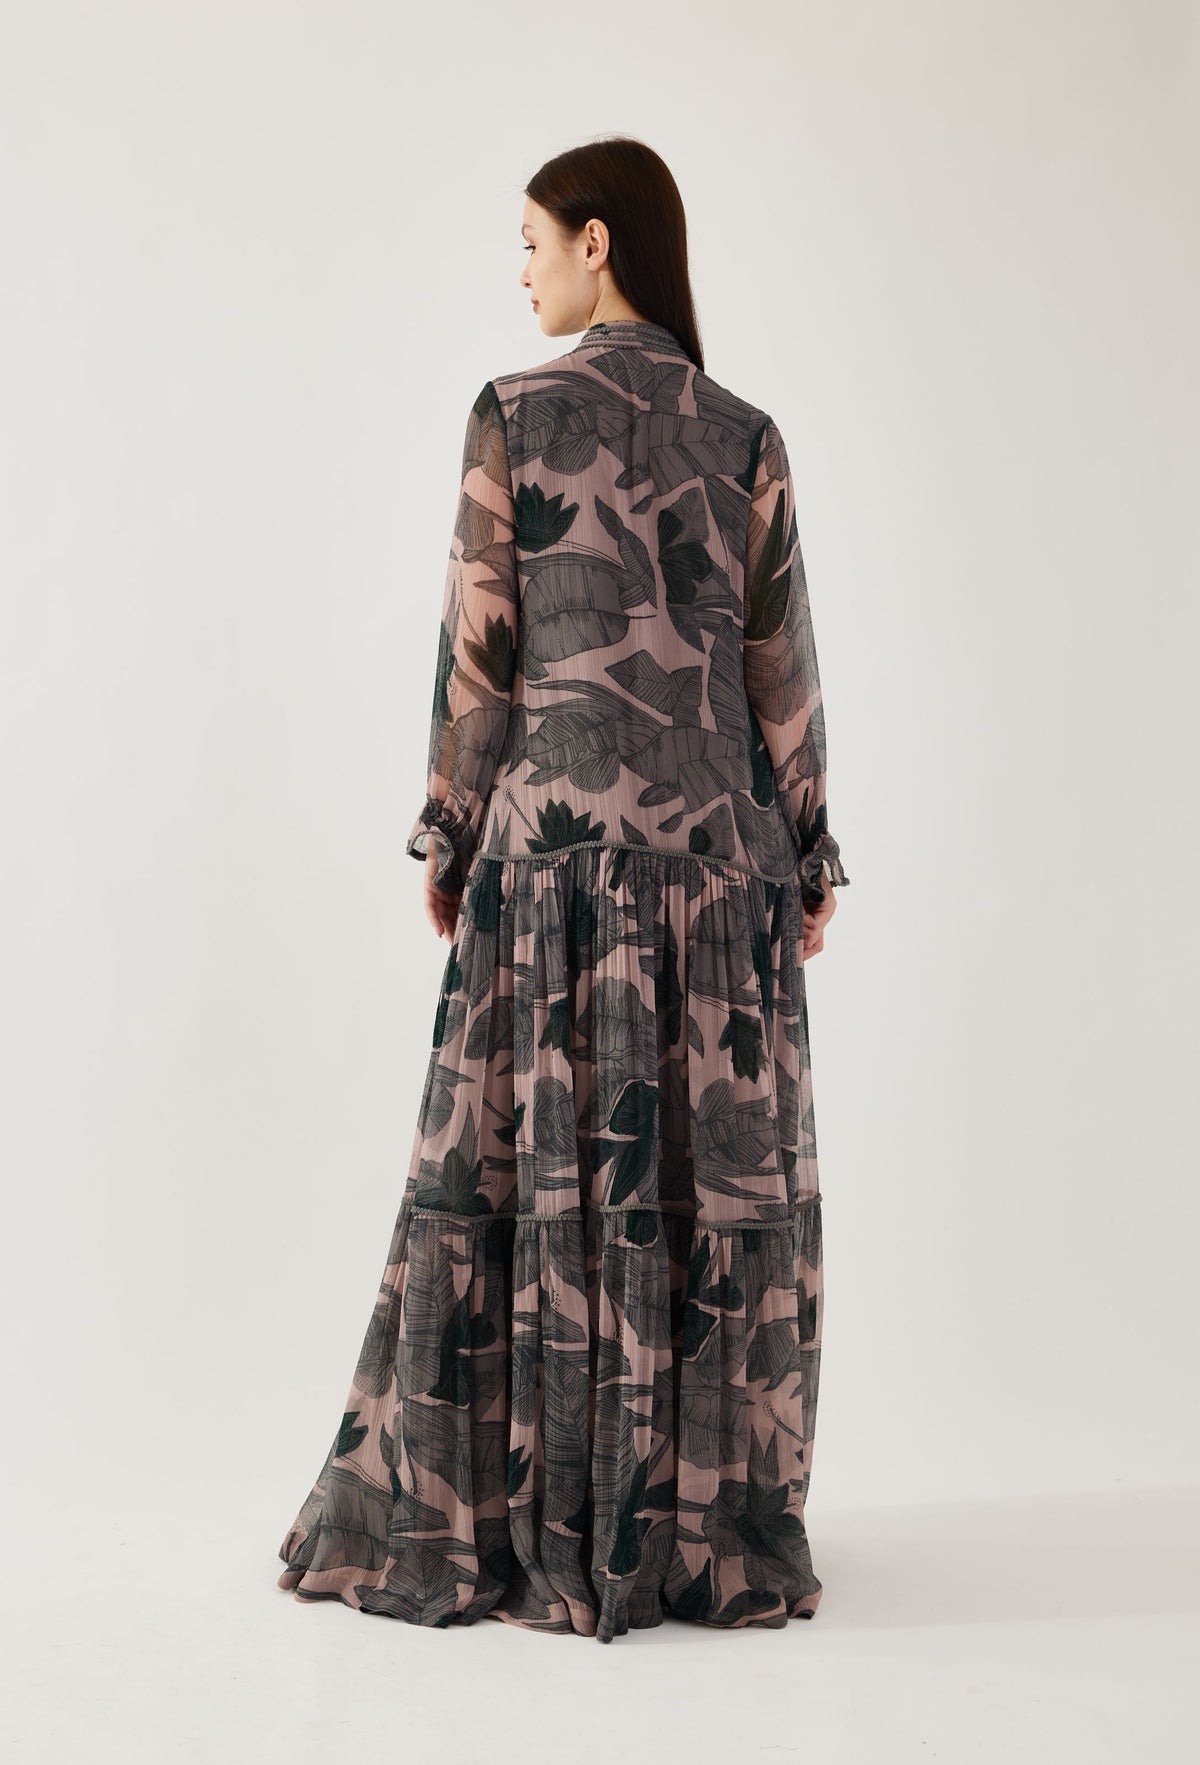 PEACH, GREY AND GREEN FLORAL LONG DRESS